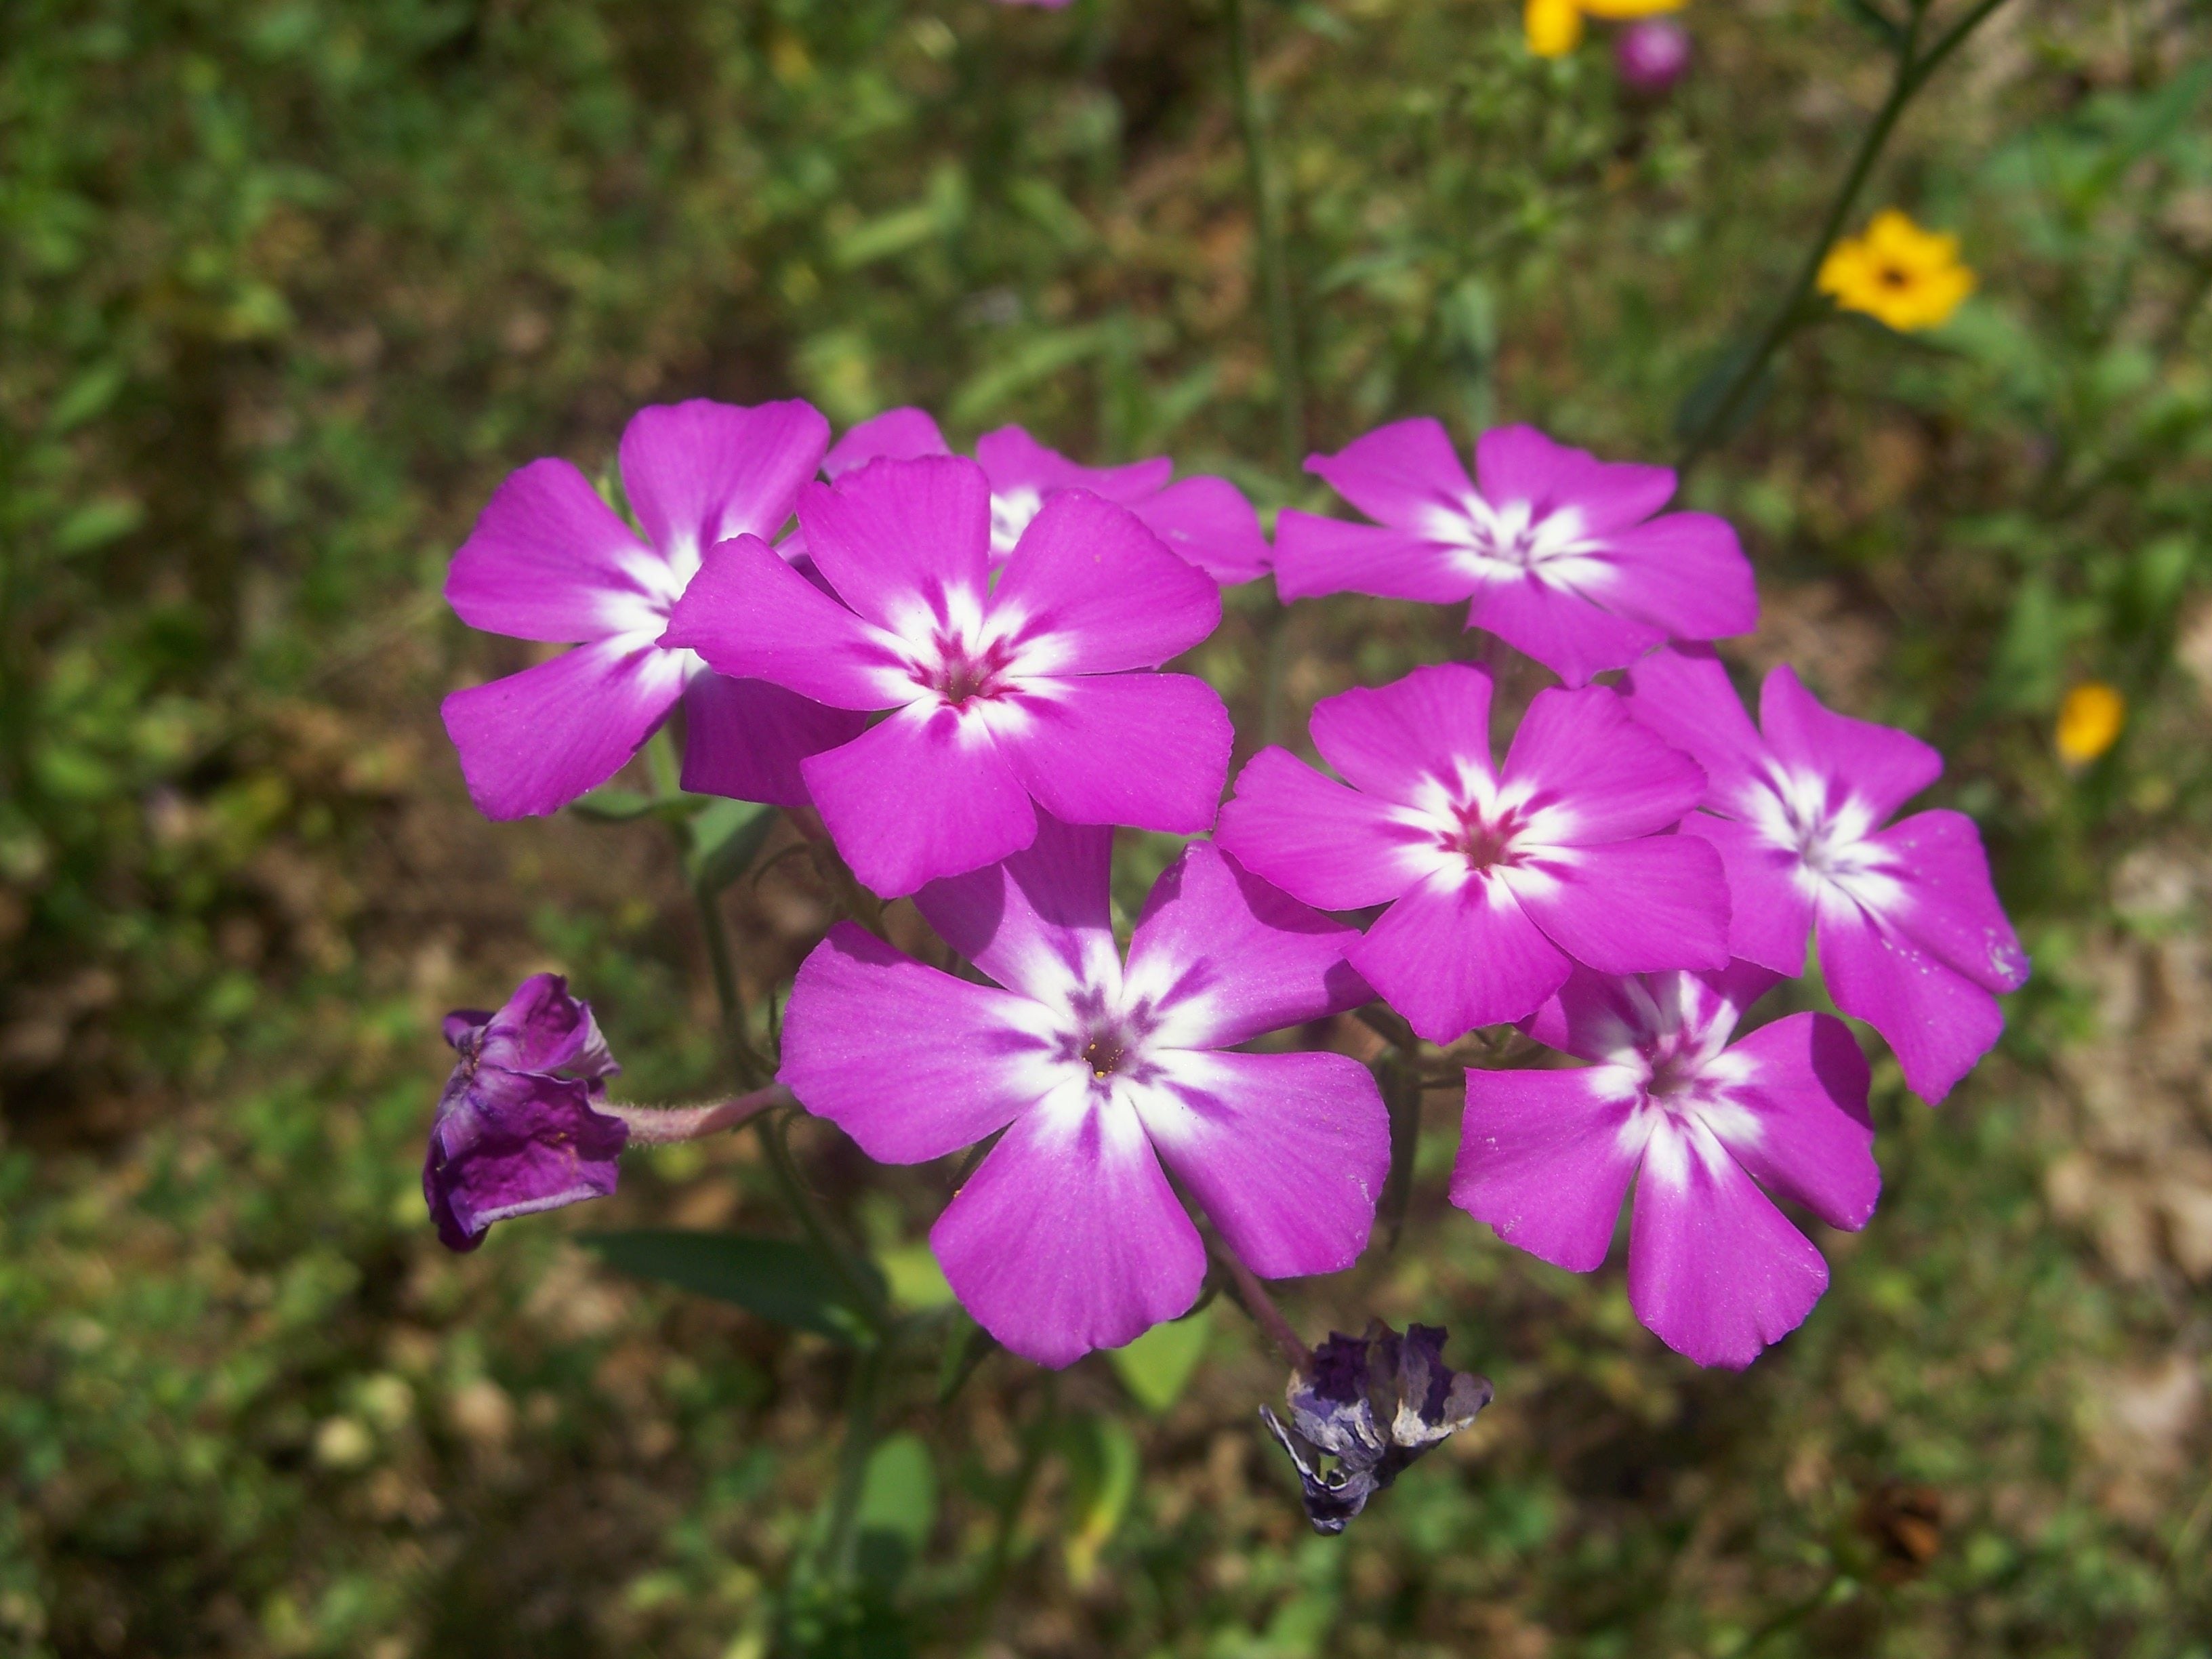 Annual Phlox Info   Learn About Growing Drummond's Phlox Plants